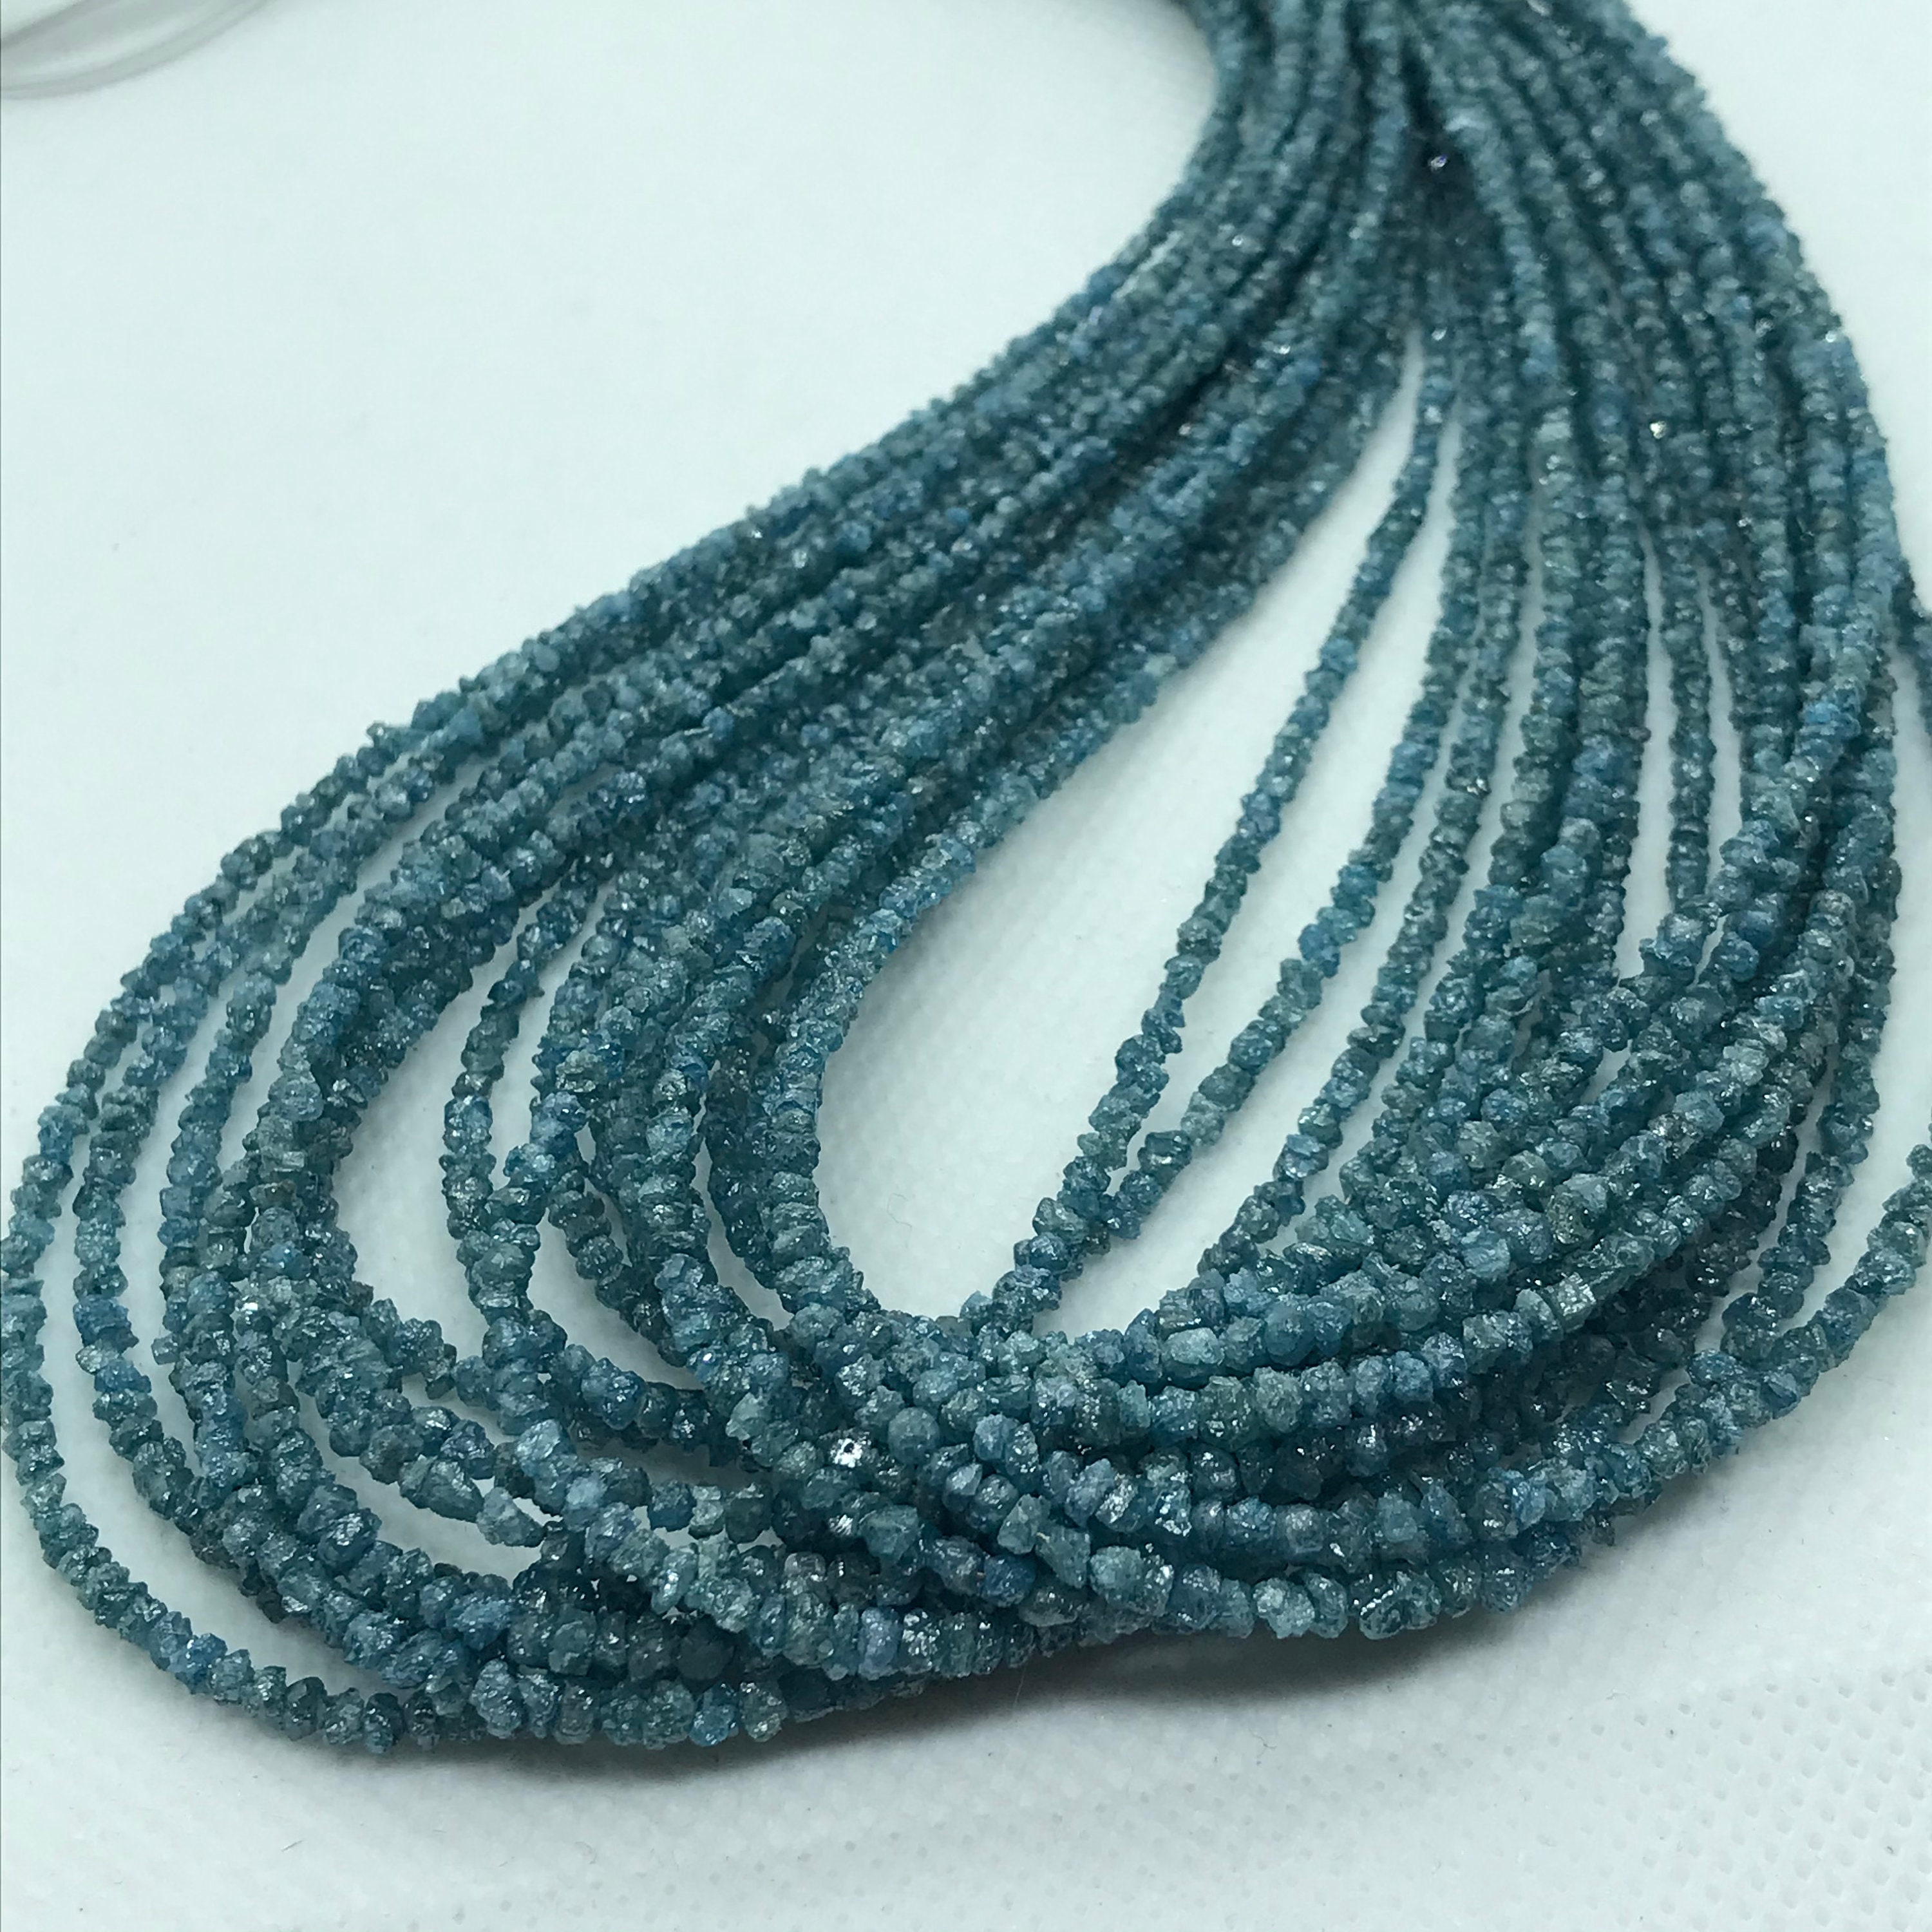 Genuine Diamond Beads Necklace: White Diamond Faceted Rondelle Beads Strand  Of 16 Inches, Weight 15 Carats, Wholesale Gemstone Beads, Online Shopping  Of Gemstone Beads, at Wholesale Price